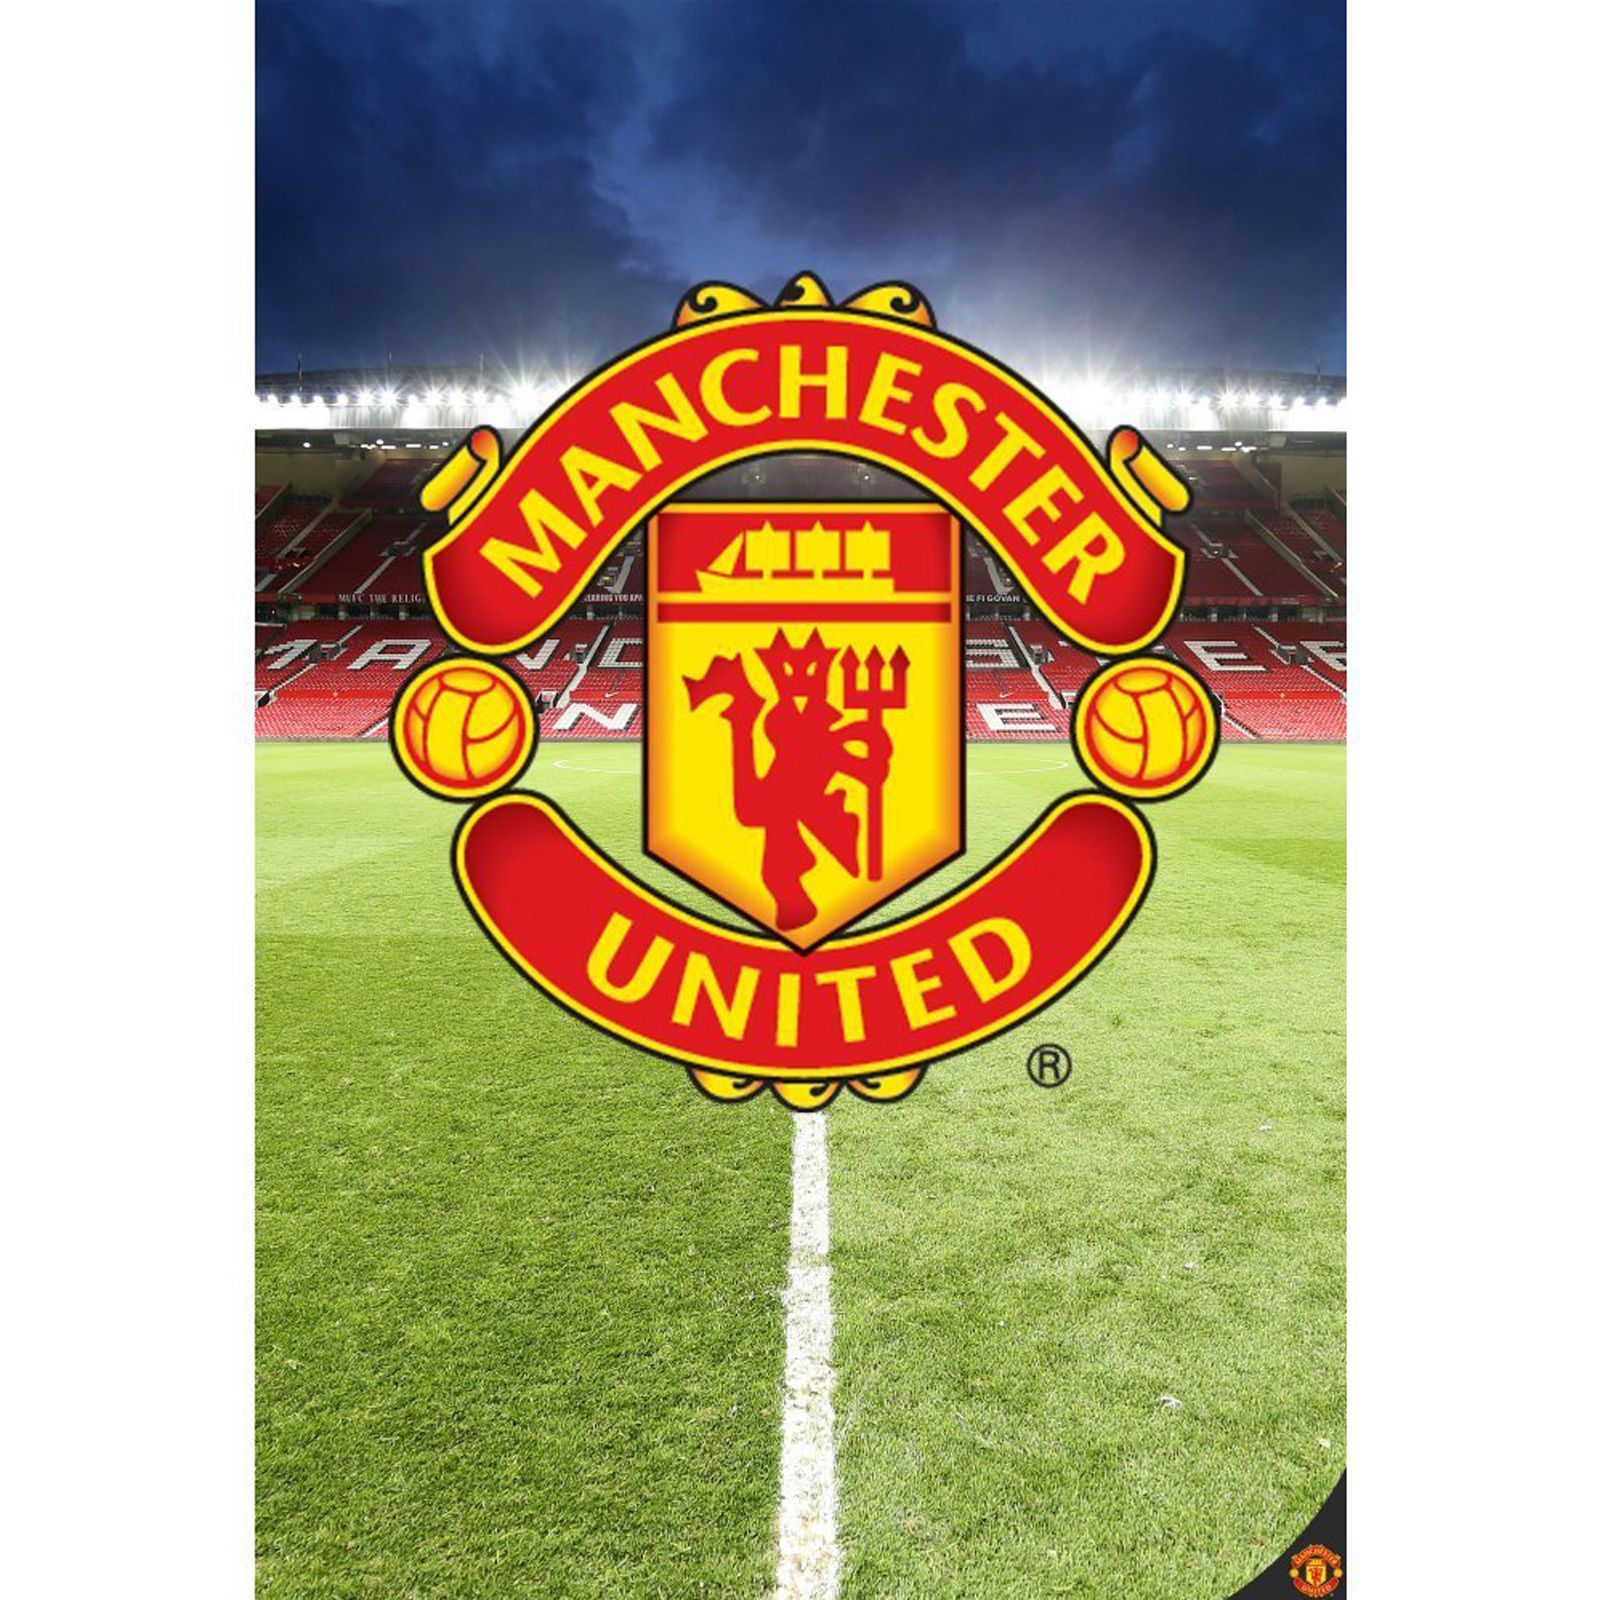 Details About Manchester United Fc Wallpaper Wall Mural New Man Utd